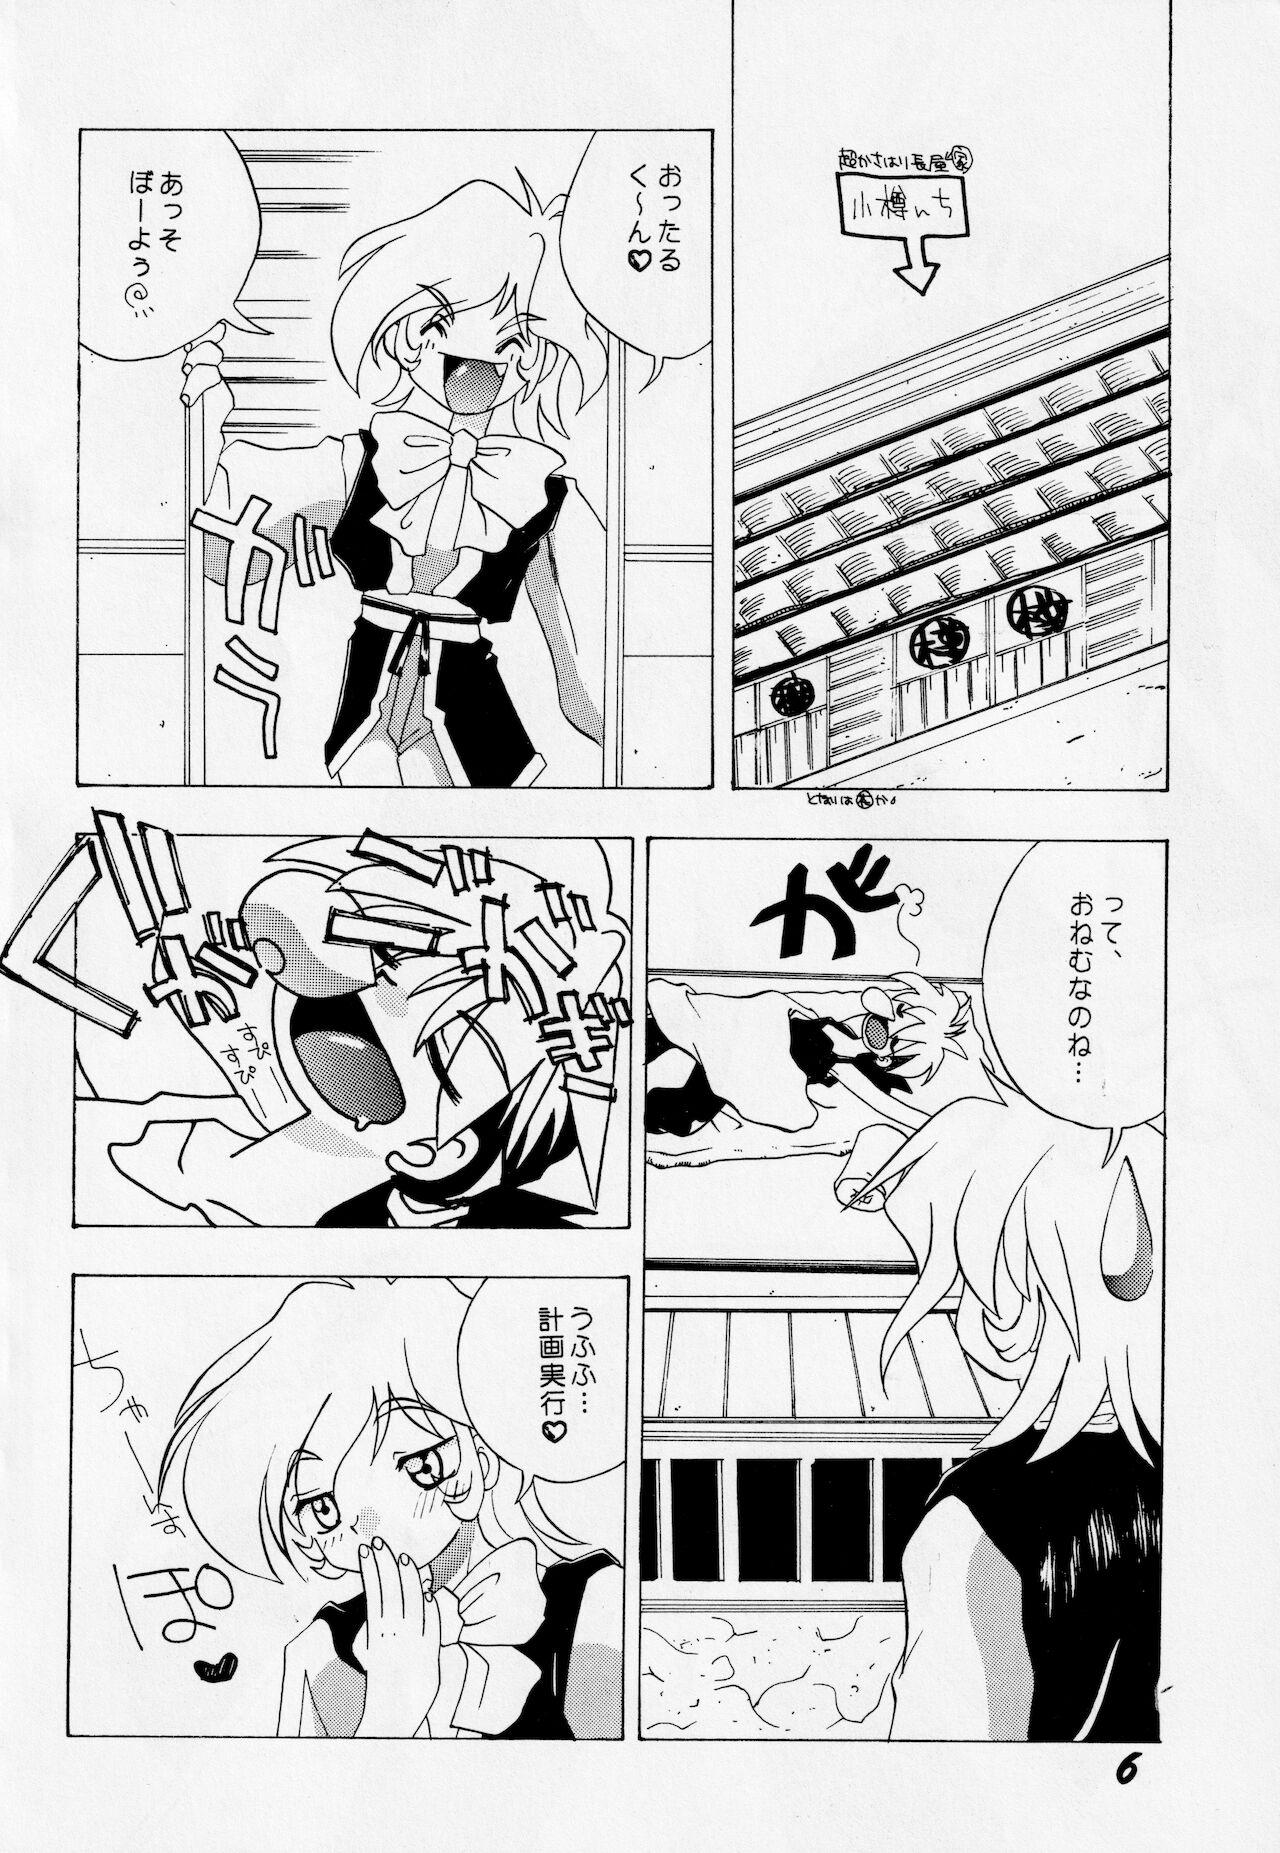 Submission Abaredaiko 2 - Saber marionette Interracial Porn - Page 5